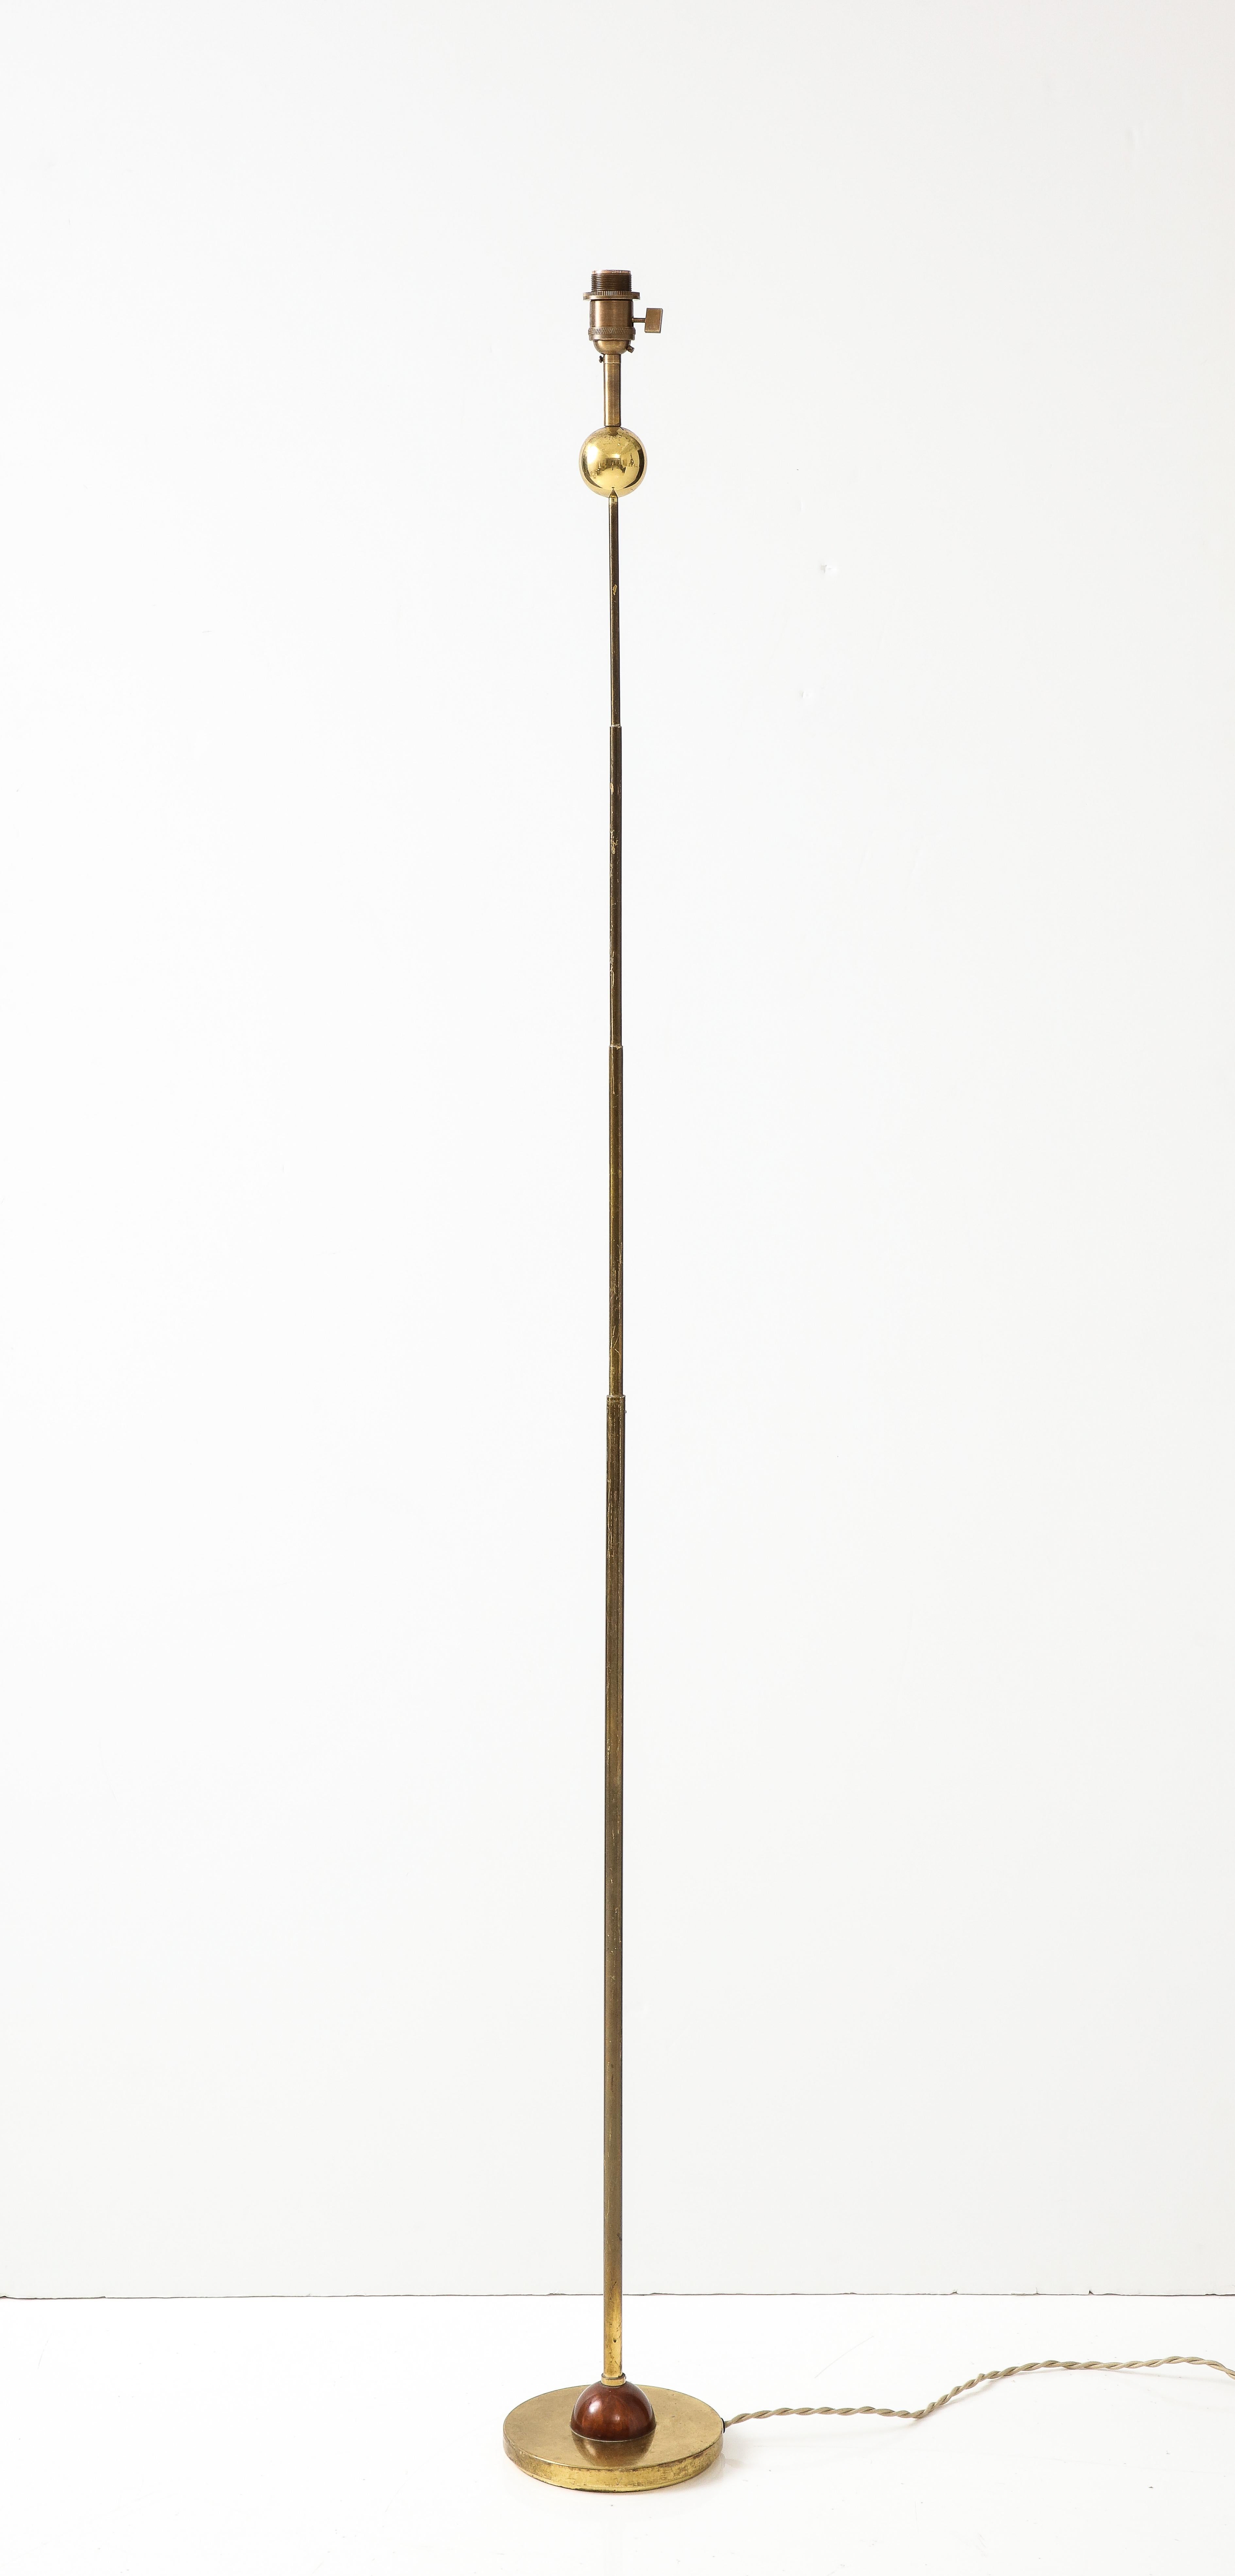 Italian Modernist Gilt Bronze Floor Lamp with Copper Accents, Italy, 1980s For Sale